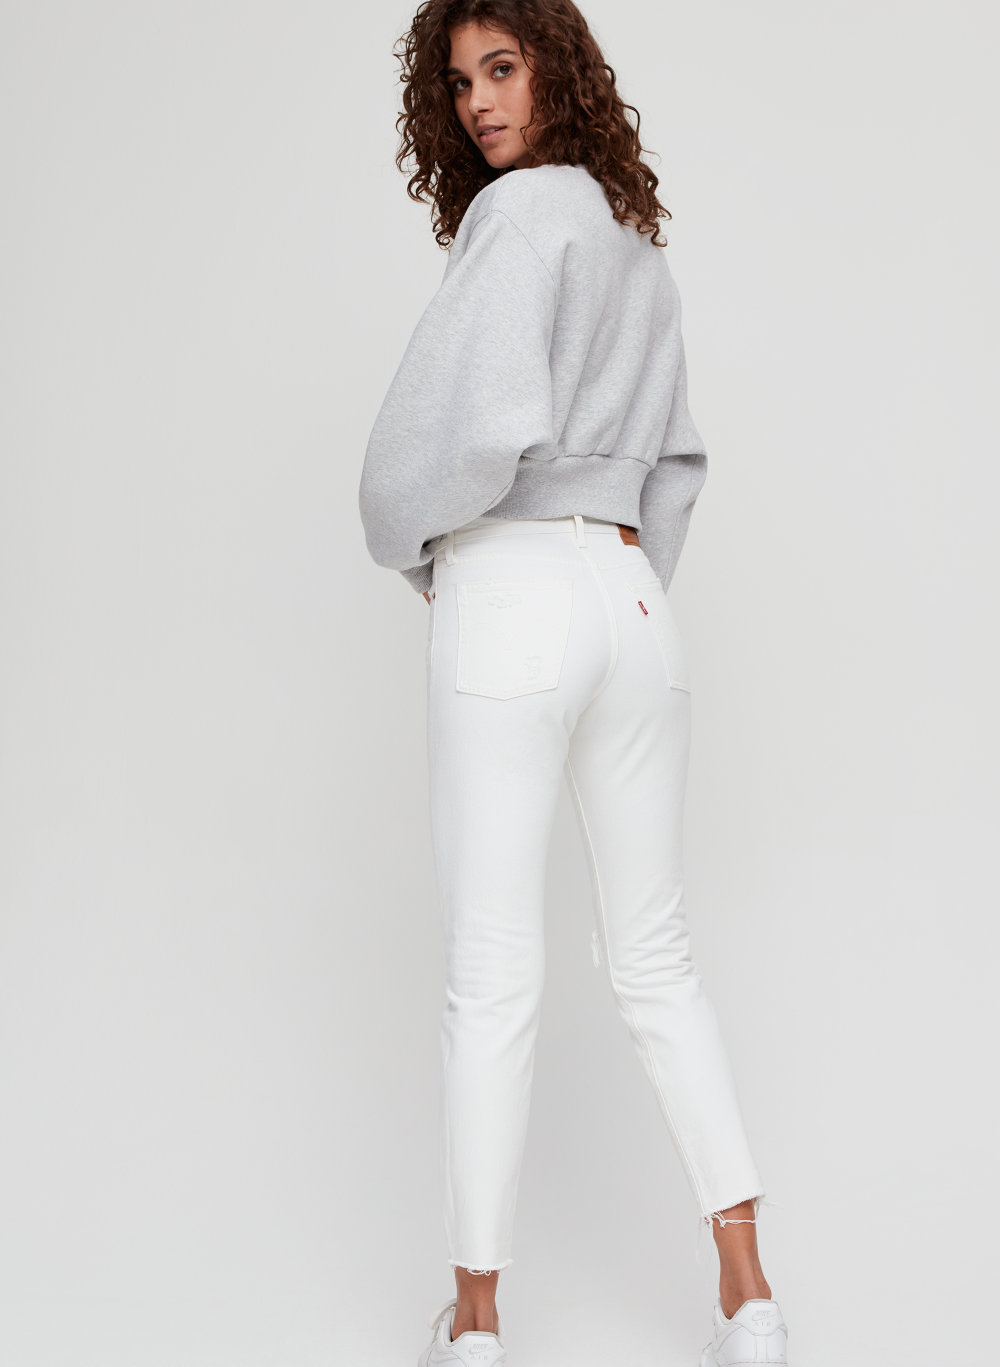 levi's white wedgie jeans